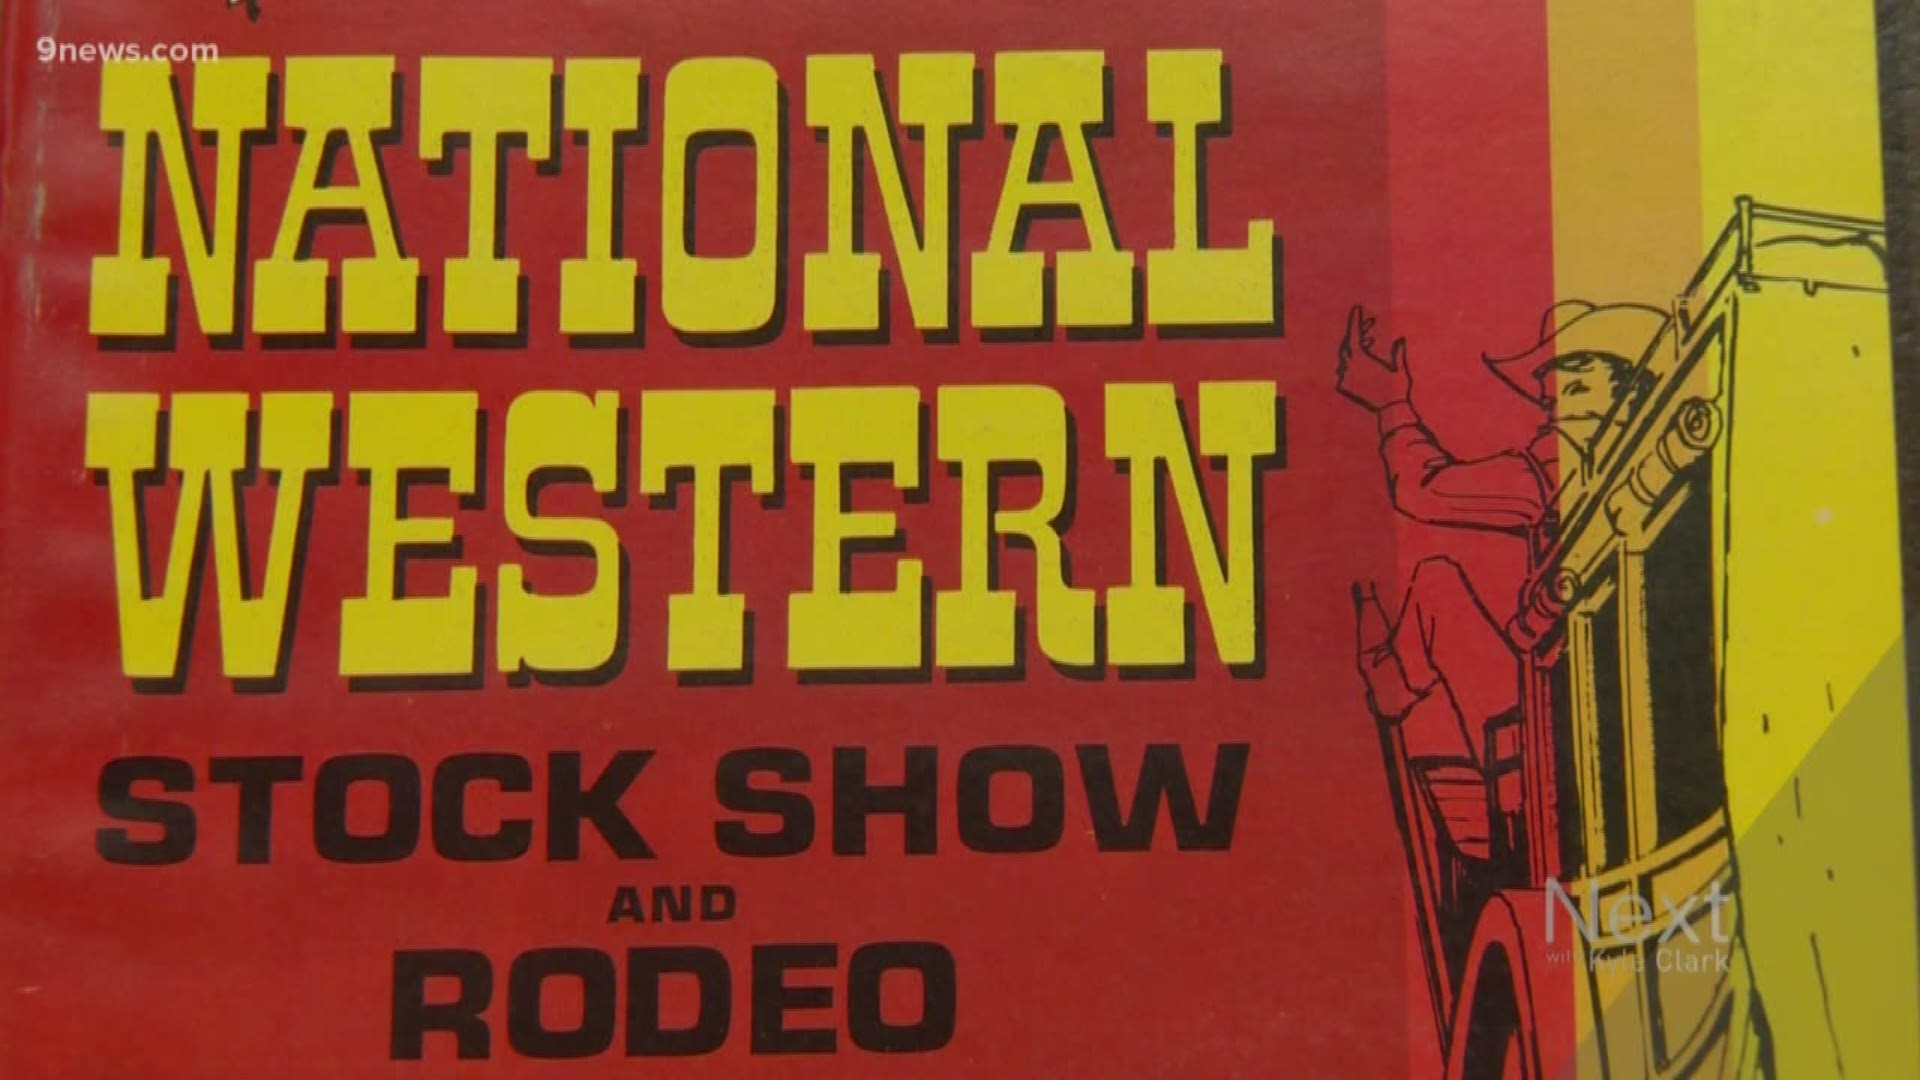 The National Western Stock Show has been around since 1906. It's fair to say a lot of things have changed in 114 years.